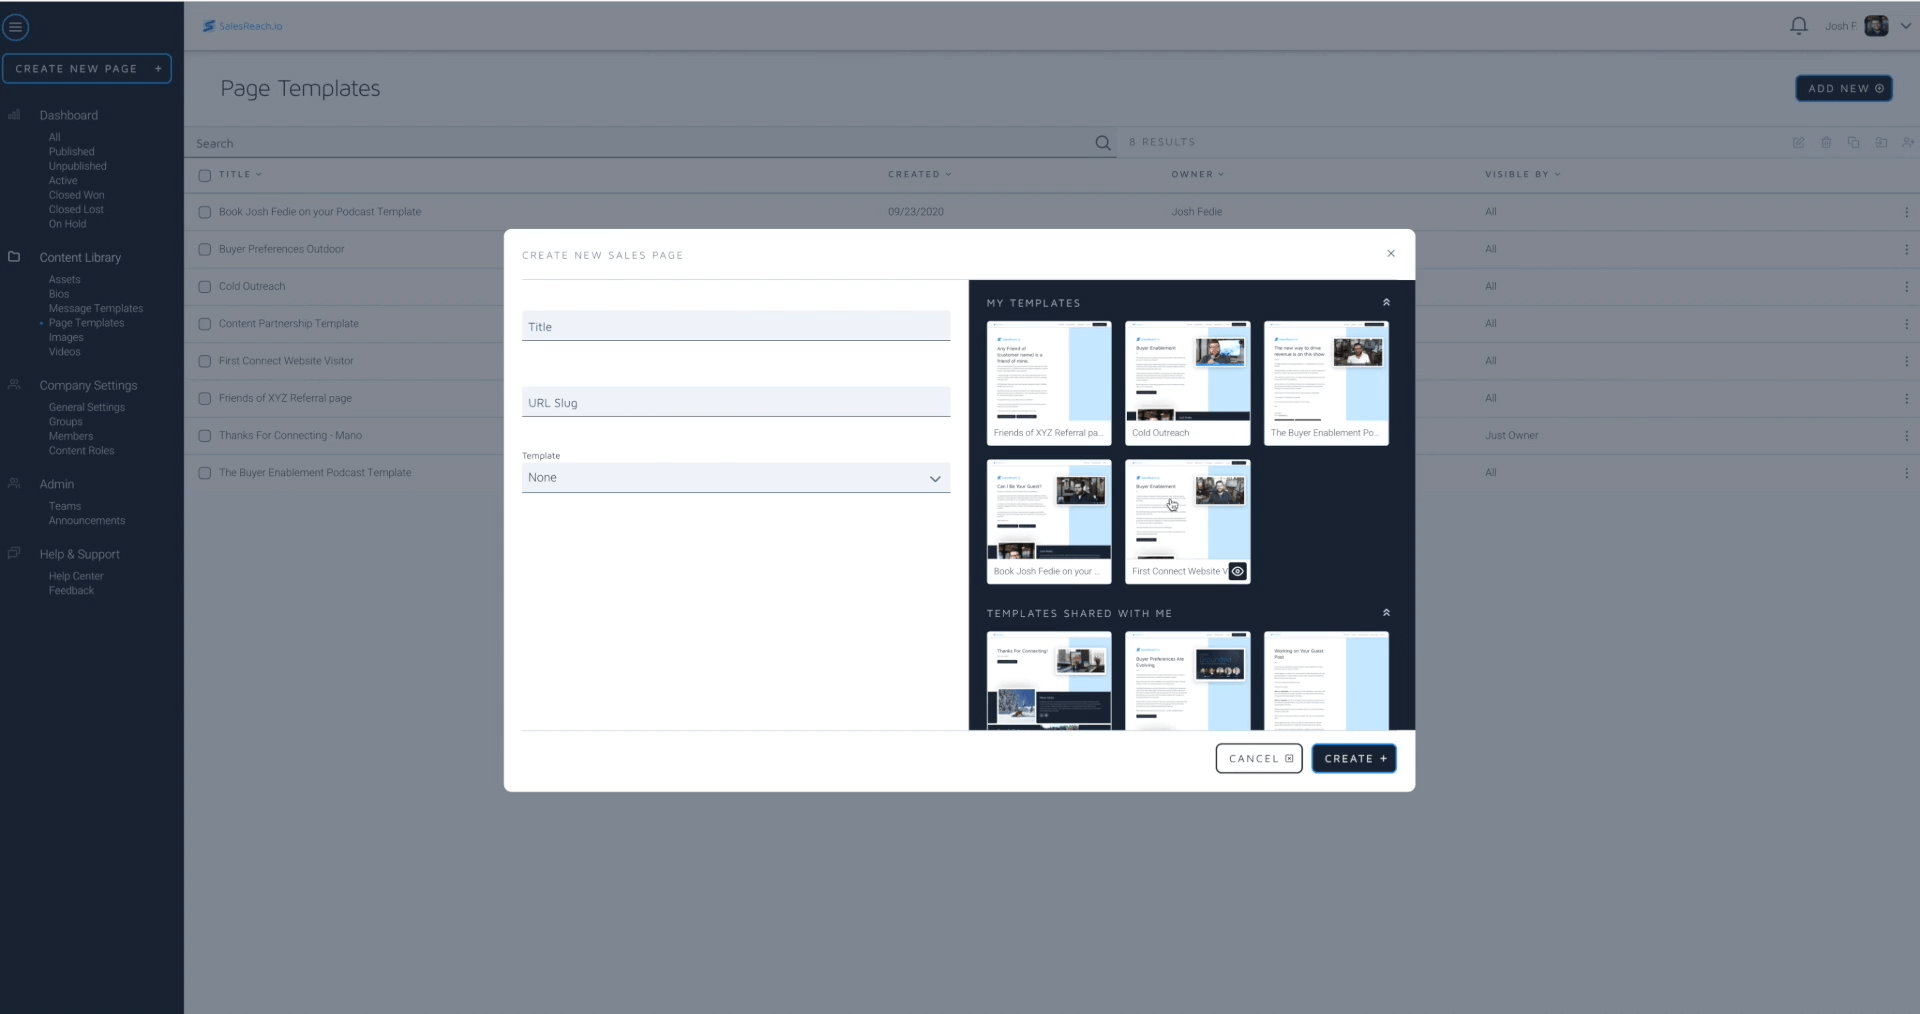 Preview Sales Page Templates